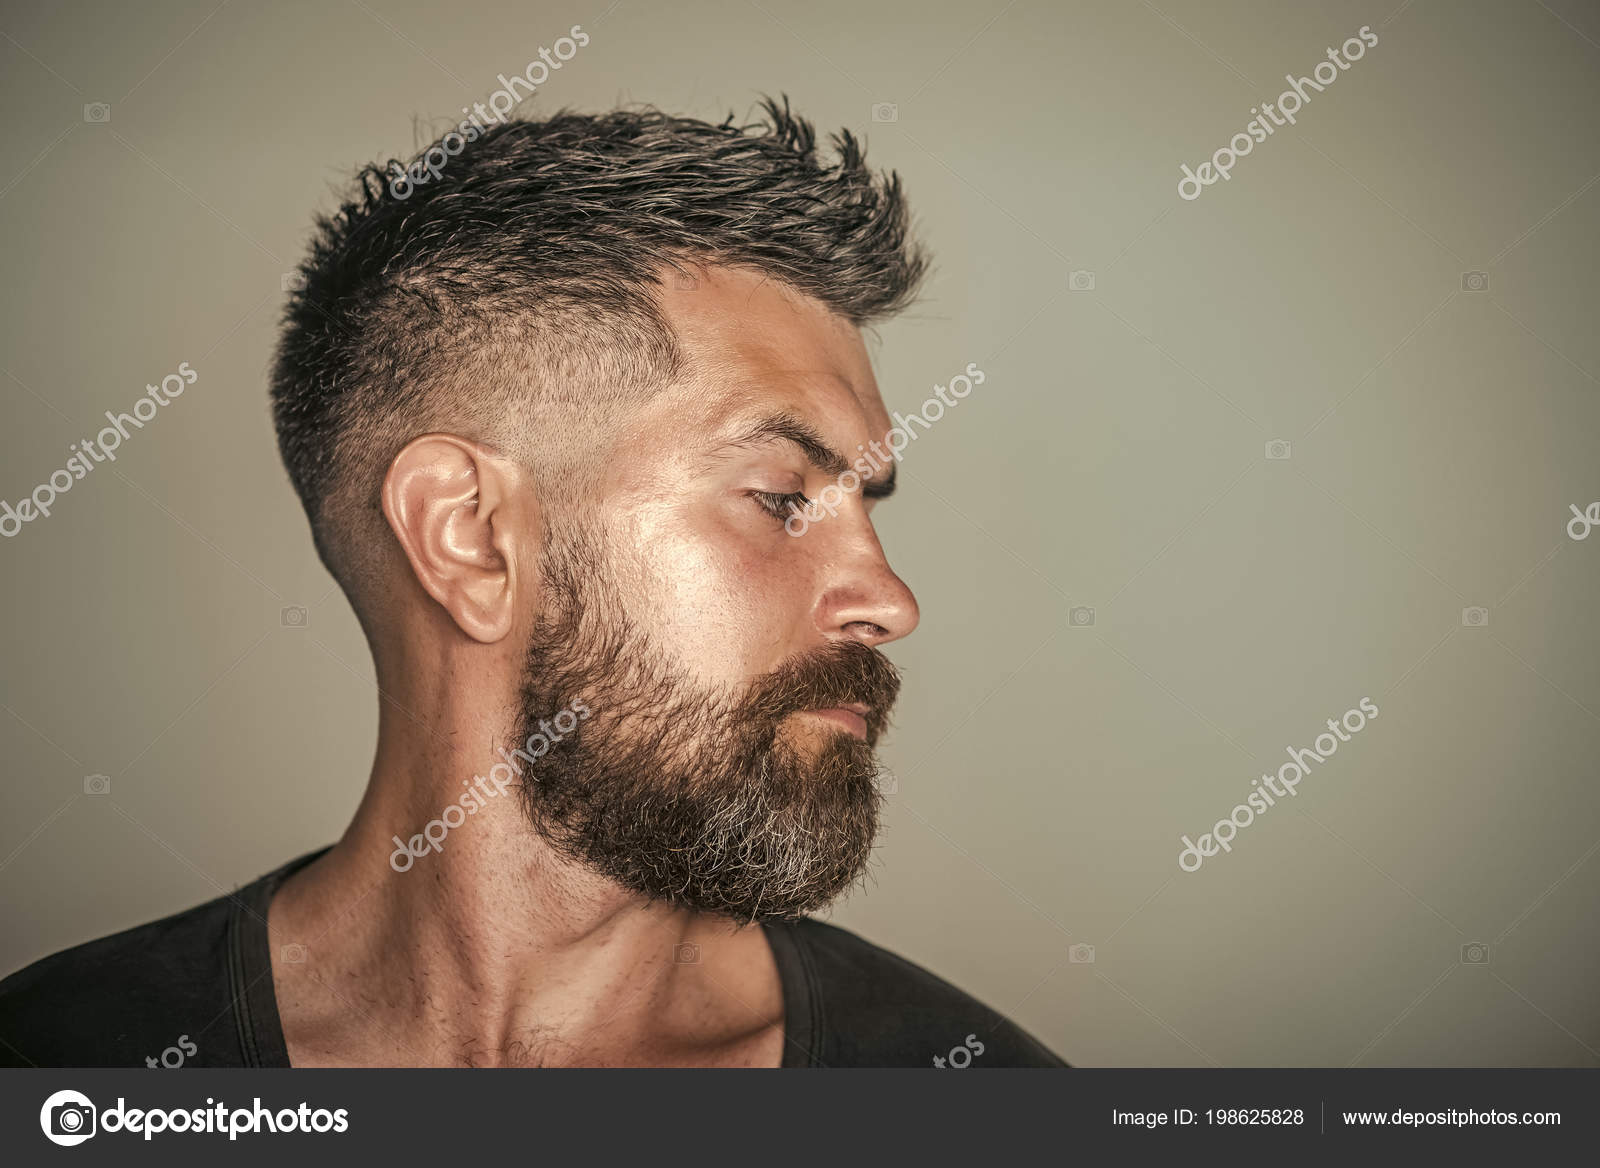 Barber shop. Hair style. Man with bearded face profile and stylish hair  Stock Photo by © 198625828